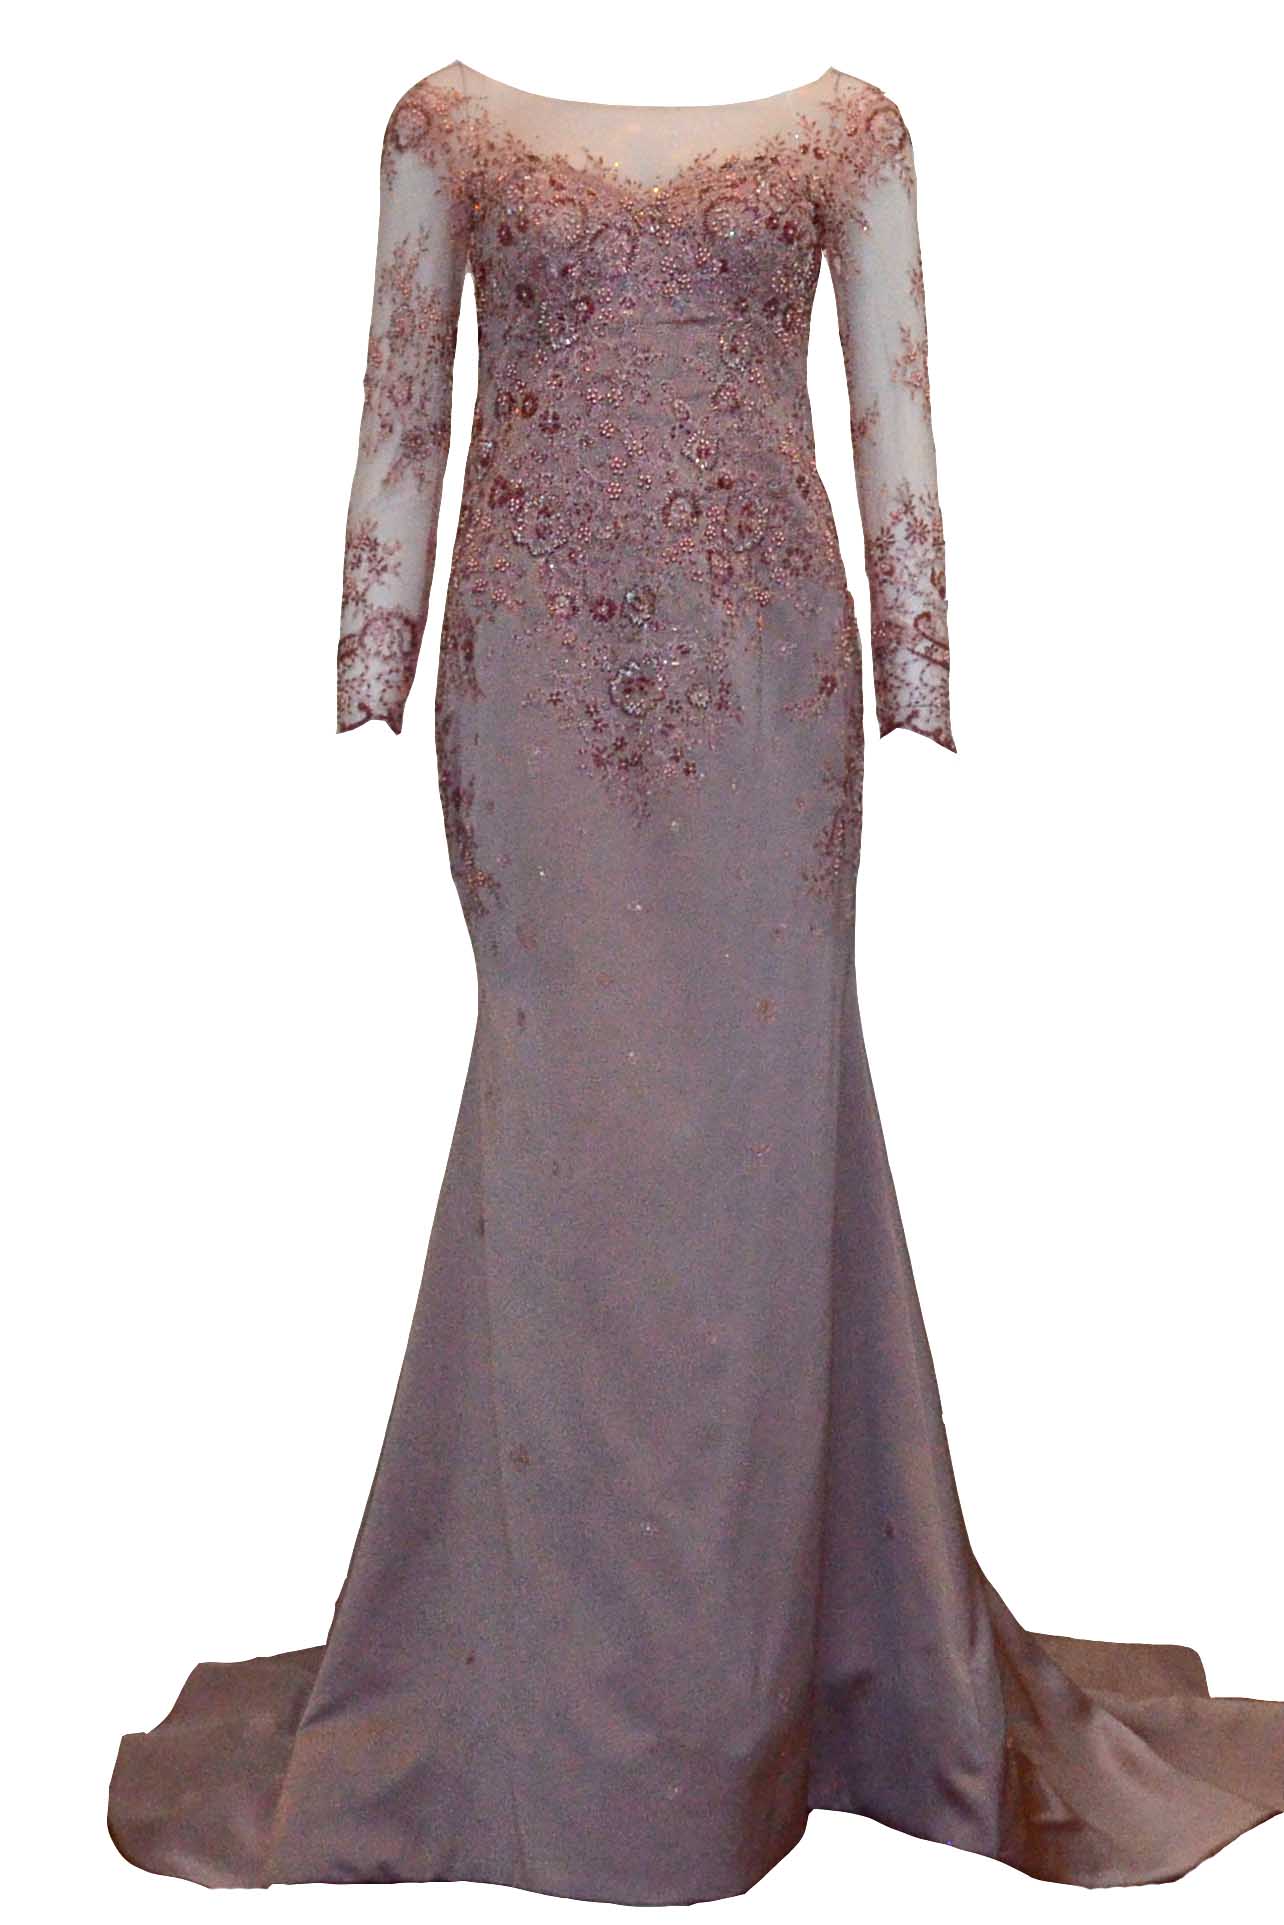 Rent: Sisca ZH - Long Sleeves Brocade Evening Gown